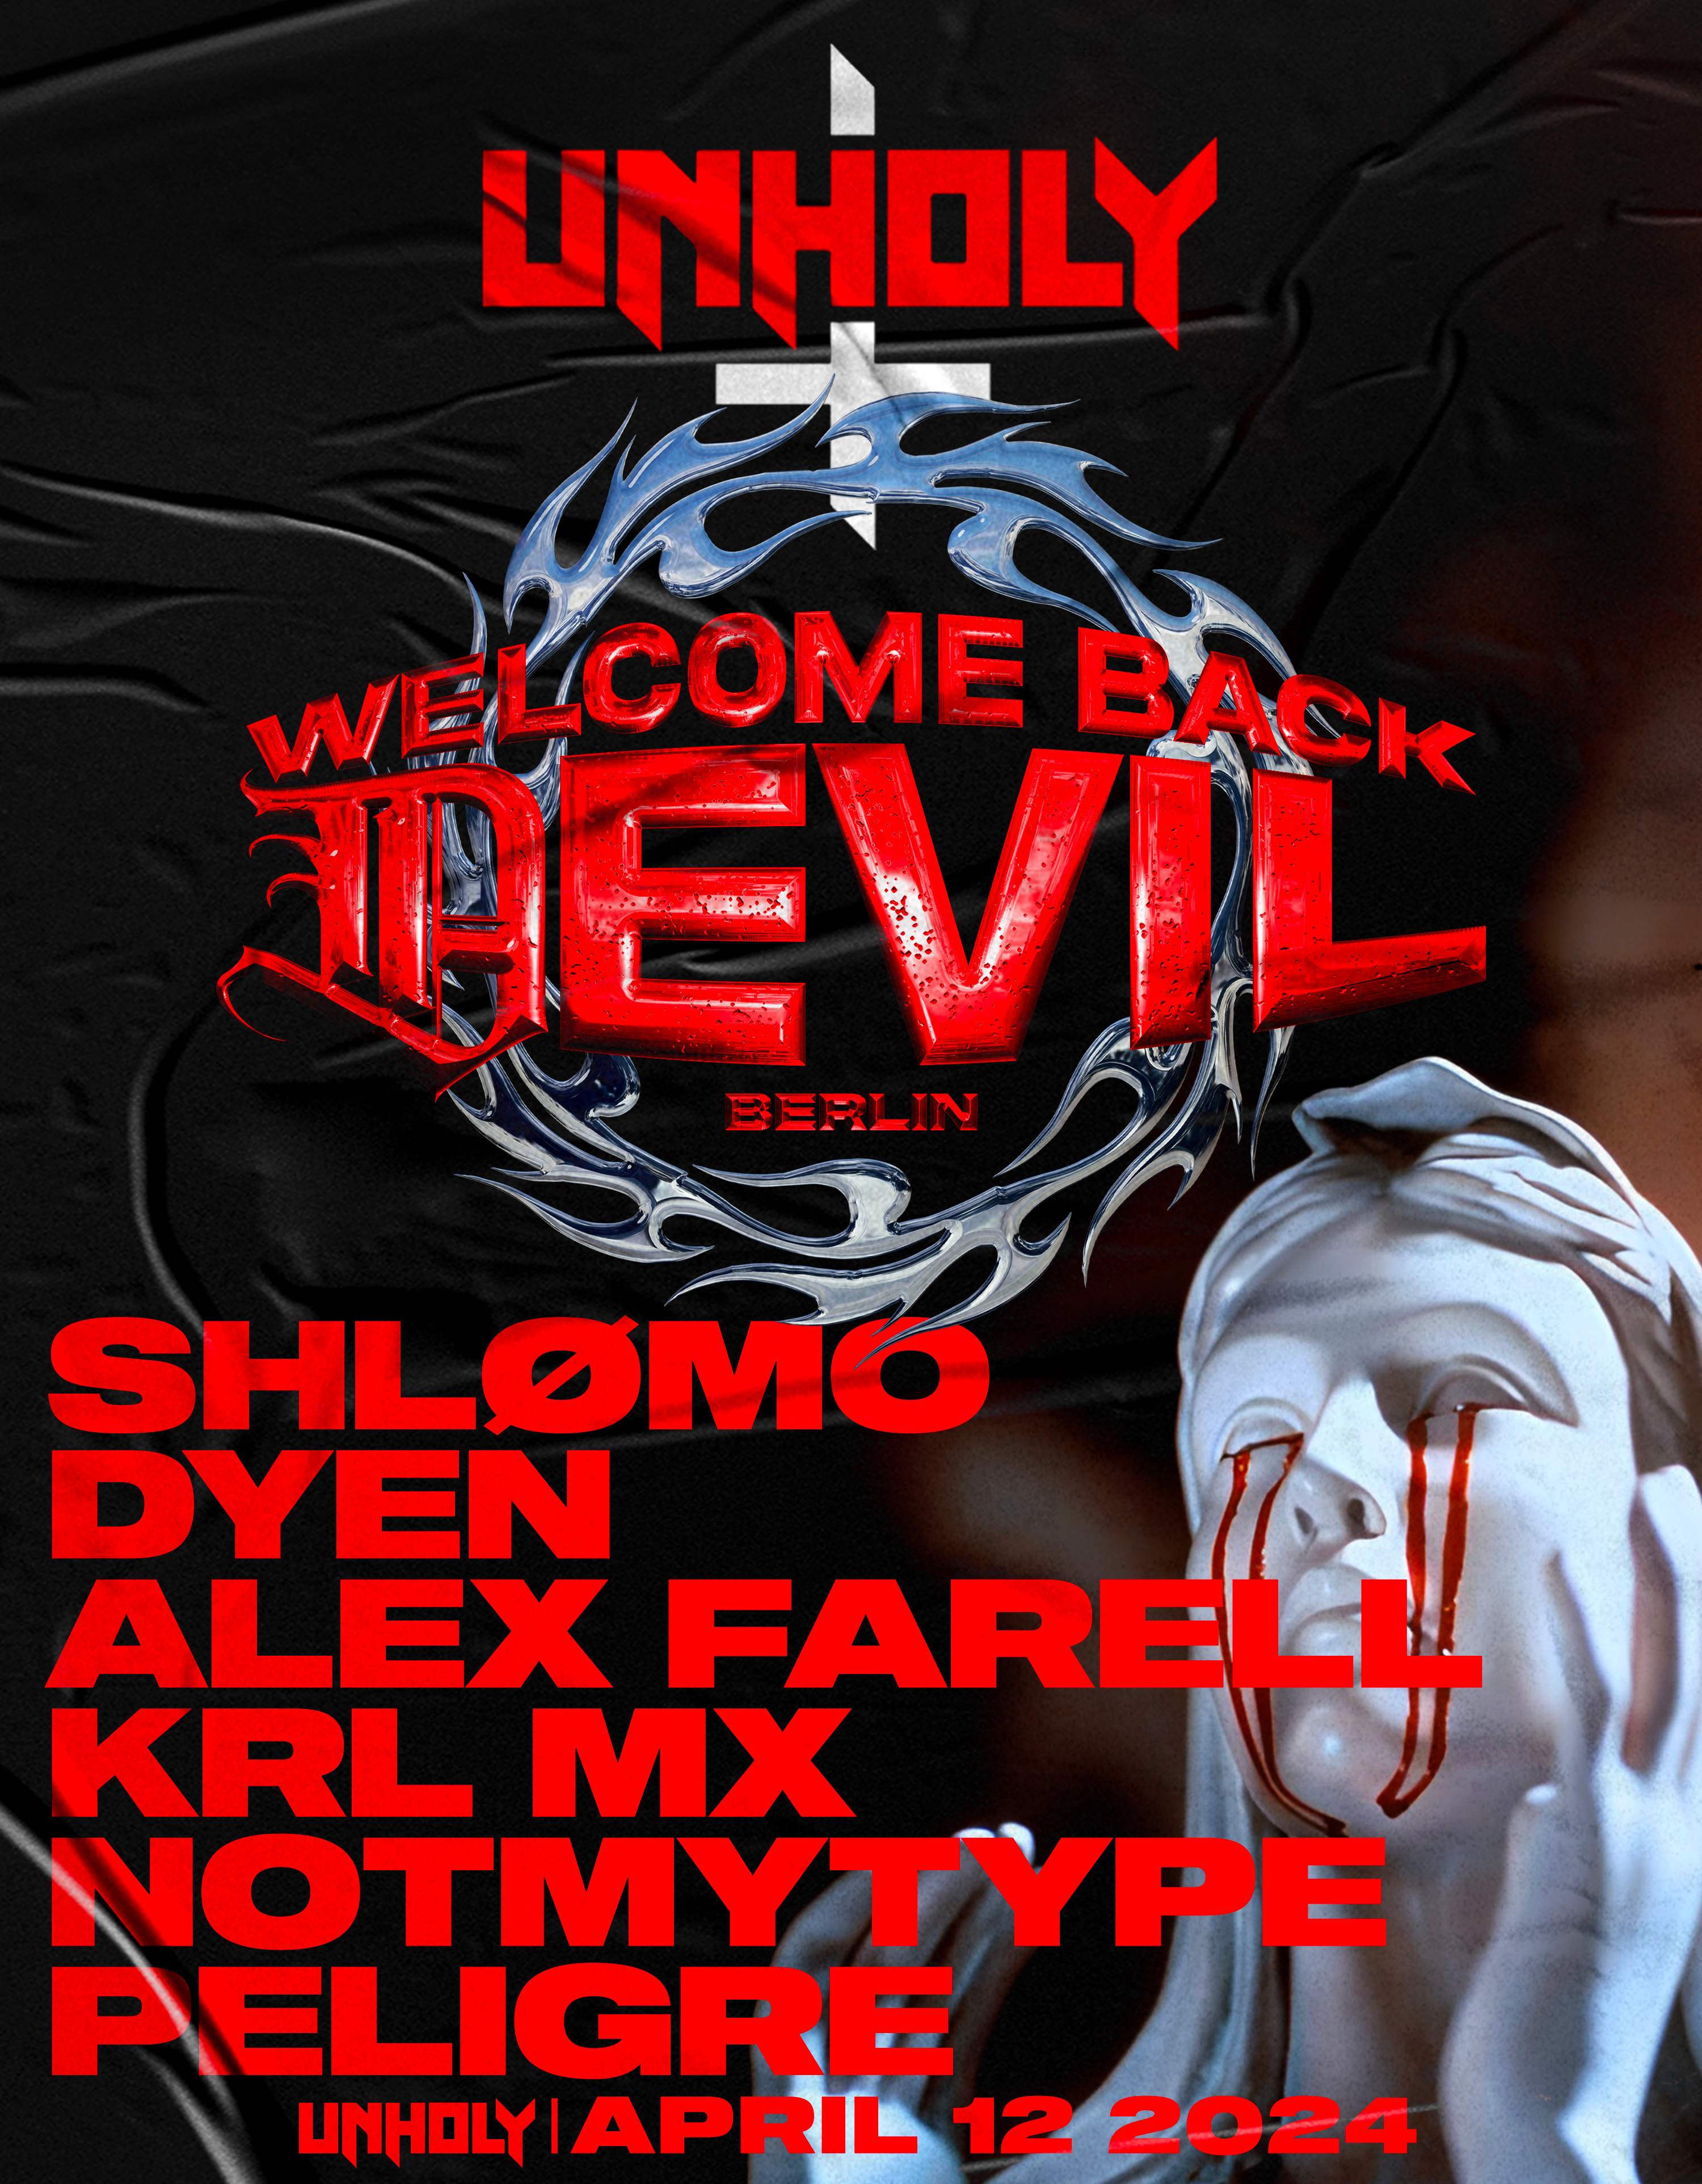 UNHOLY x WELCOME BACK DEVIL - フライヤー表